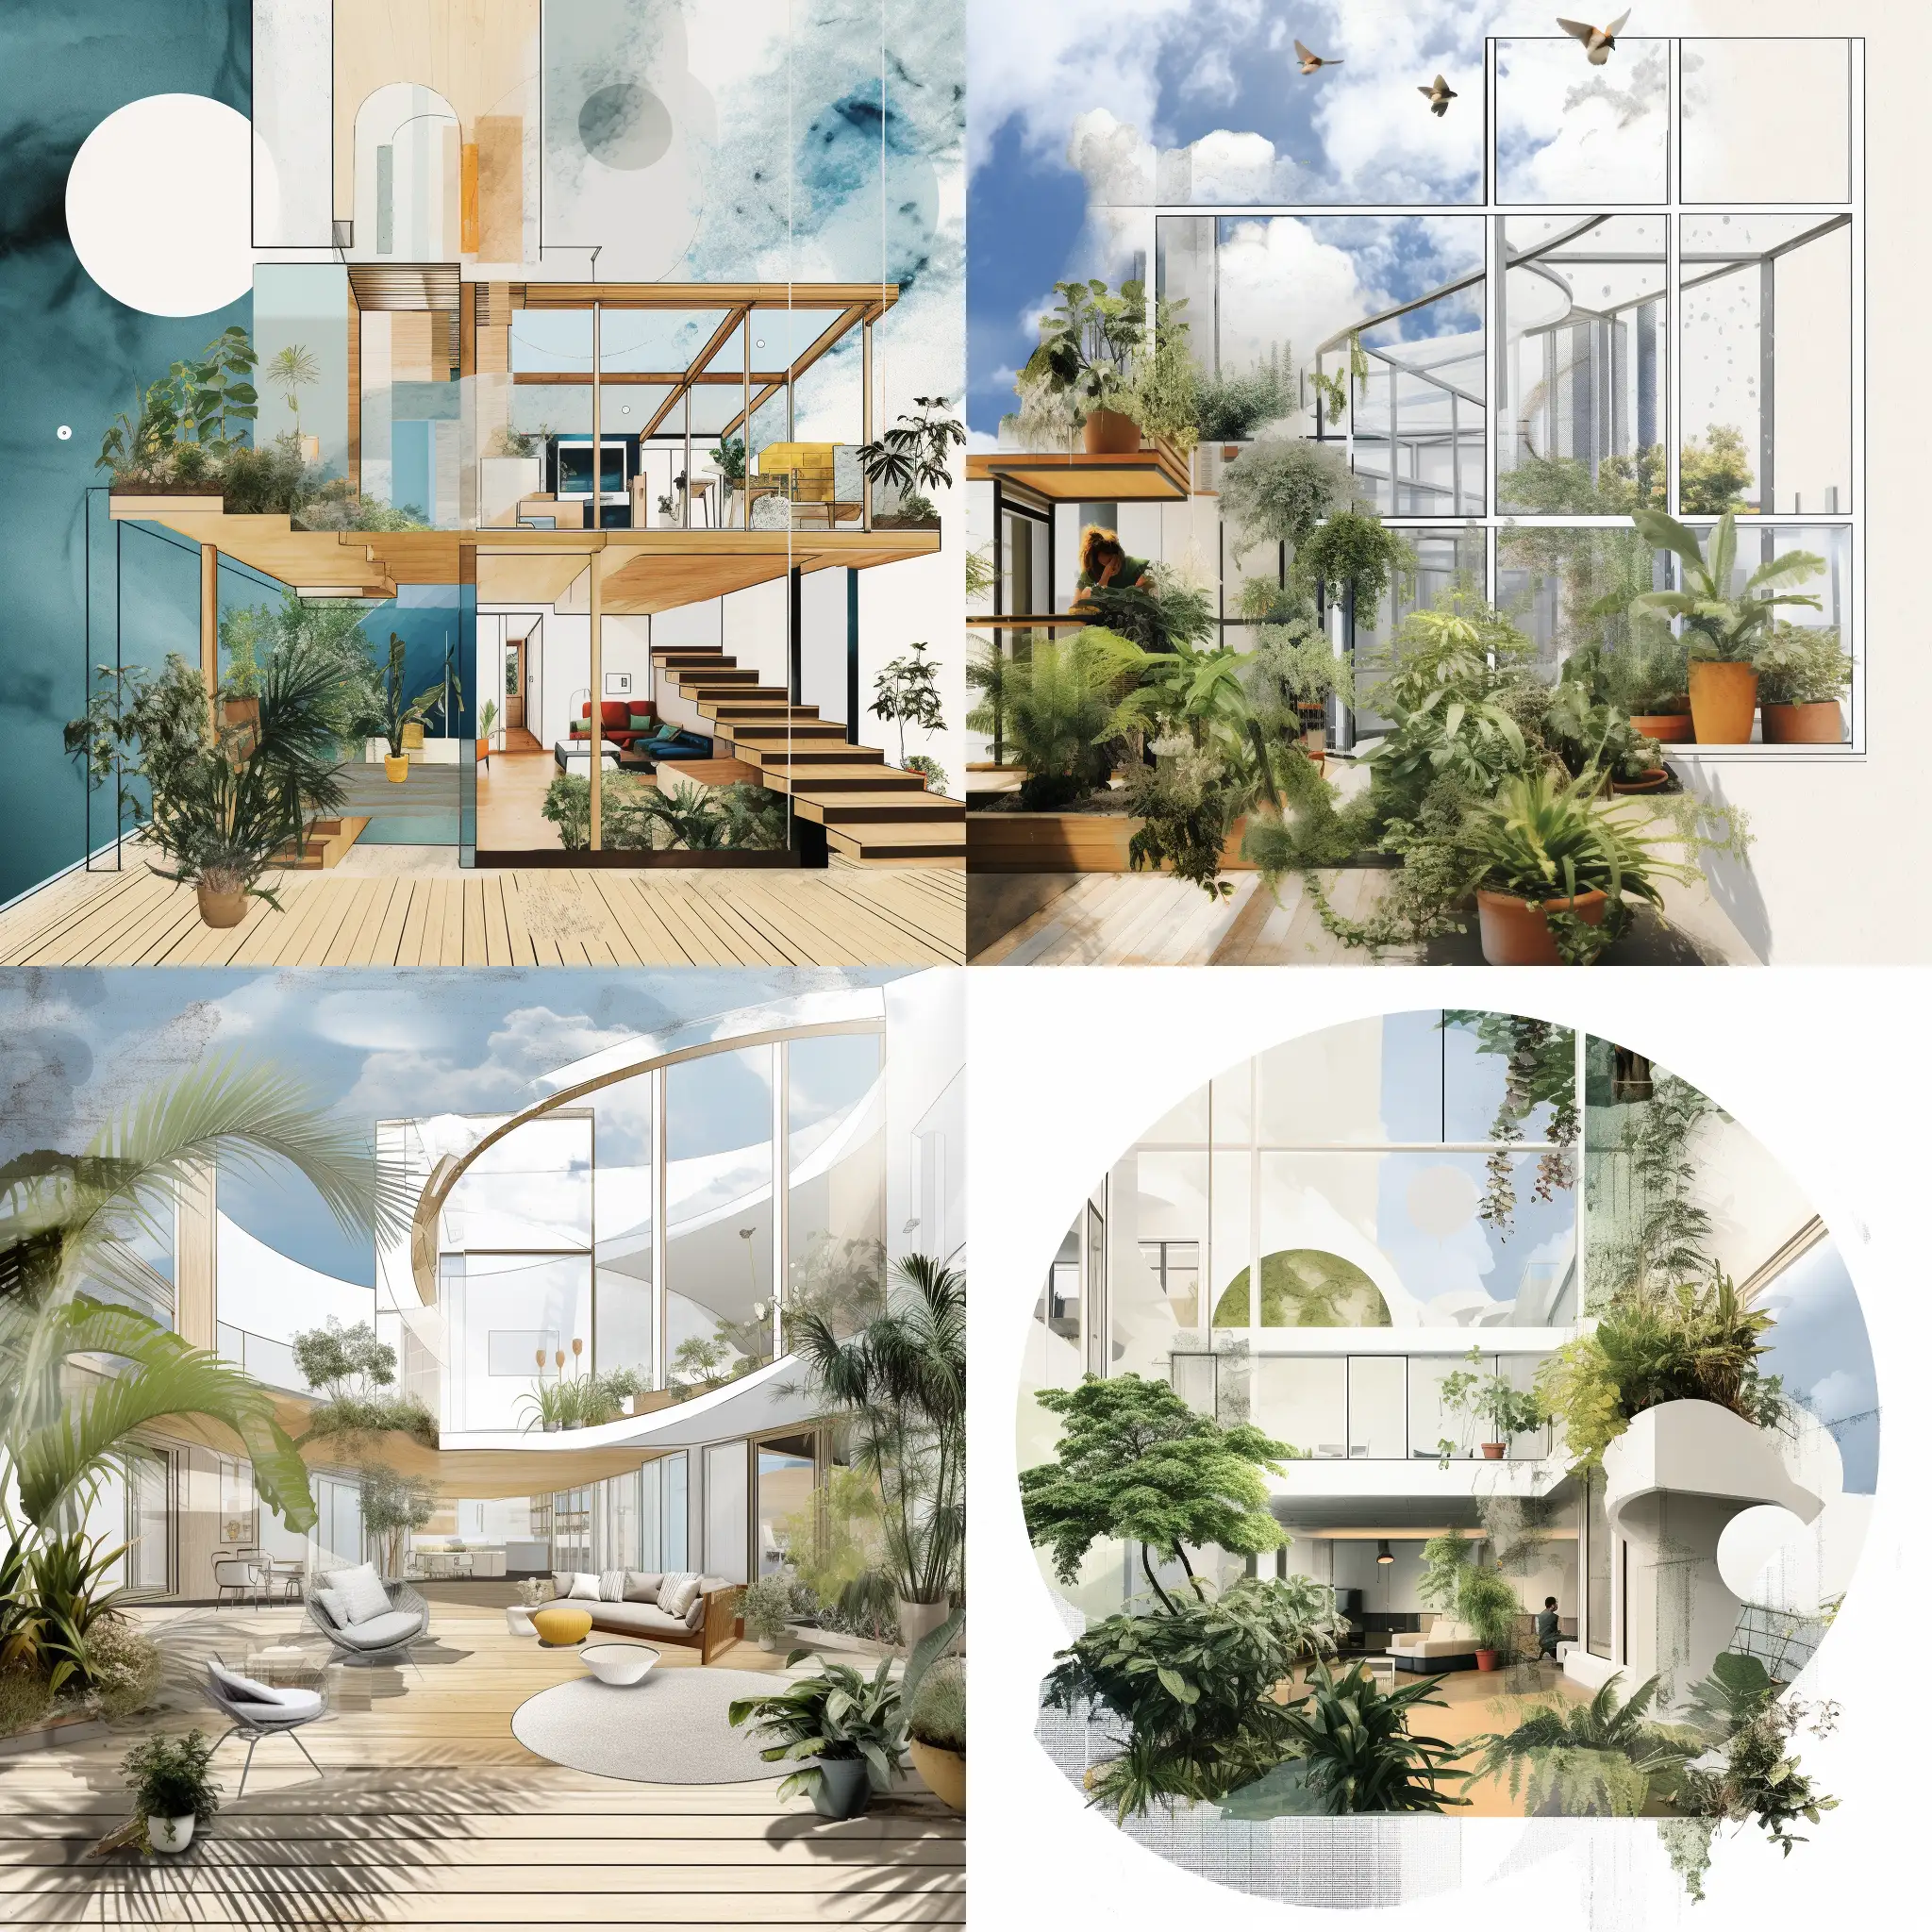 a simple concept collage for a design project with inside outside concept witn an open to sky atrium for rehabilitation centre with plants and a safe and healthy hospital
showcasing sketch and collage